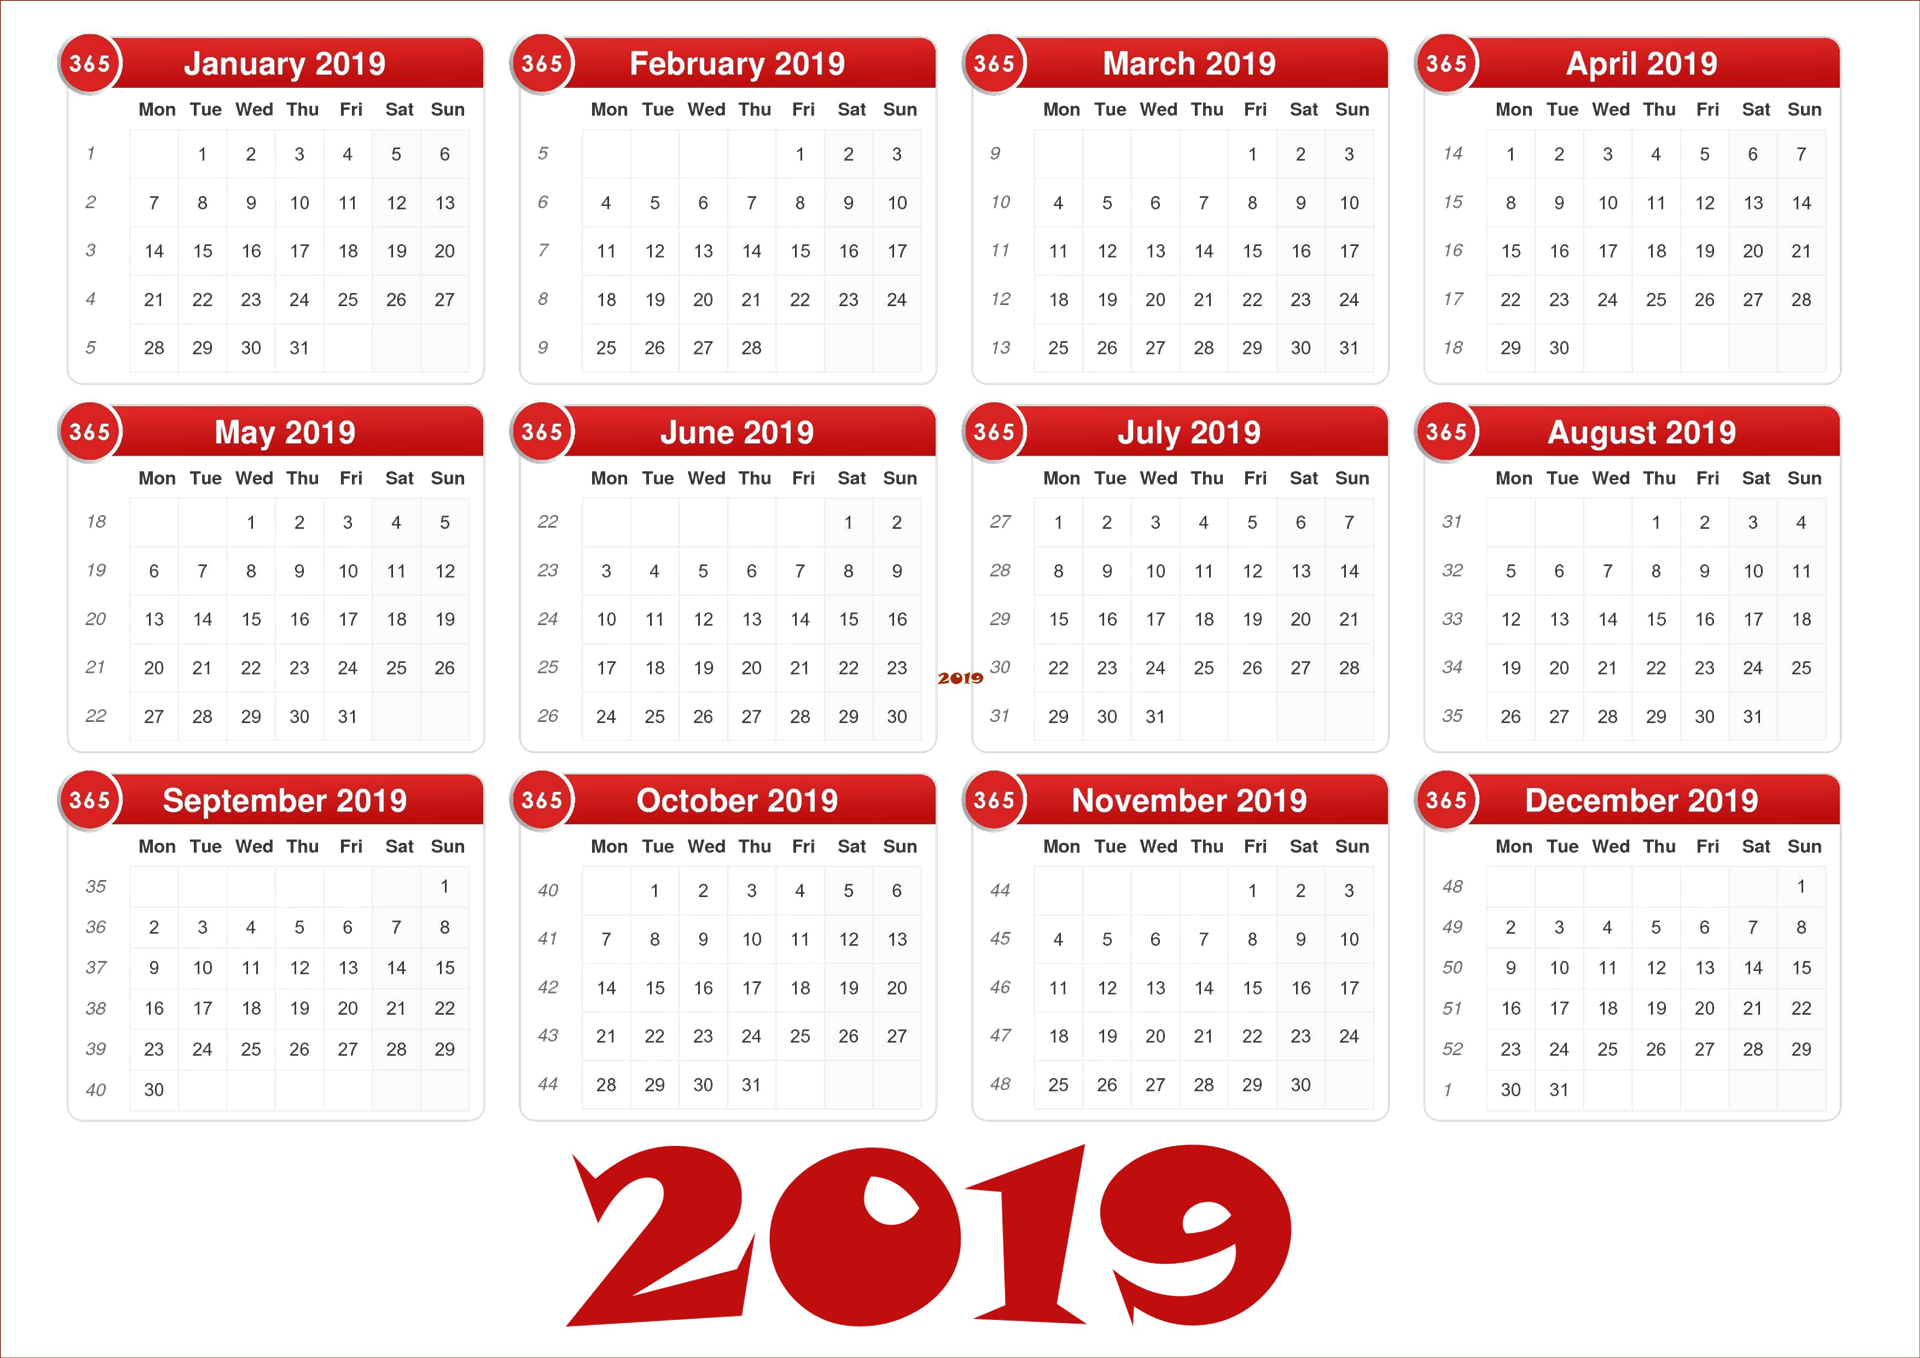 Calendar 2019 Hd With Indian Png Hd Wallpaper